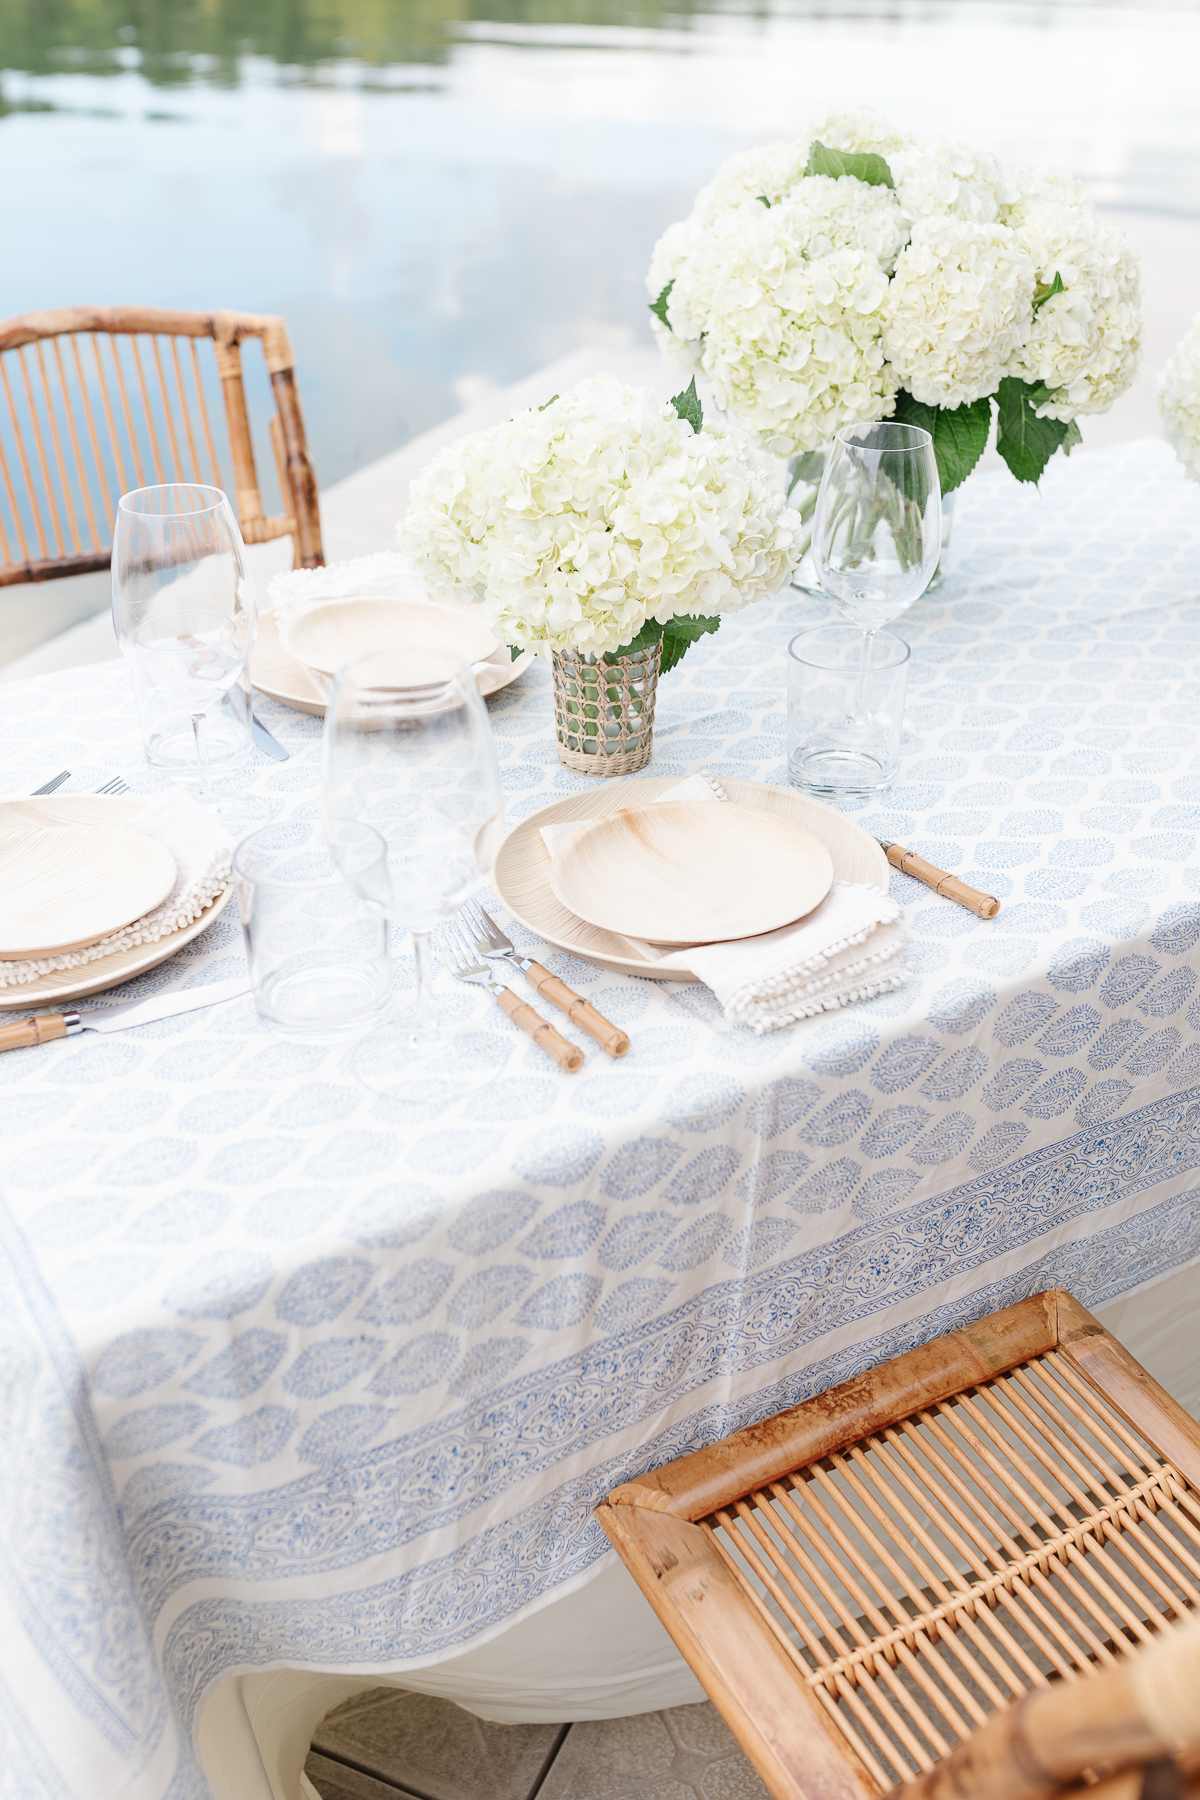 A table with white flowers on it, covered in a blue and white block print table cloth.